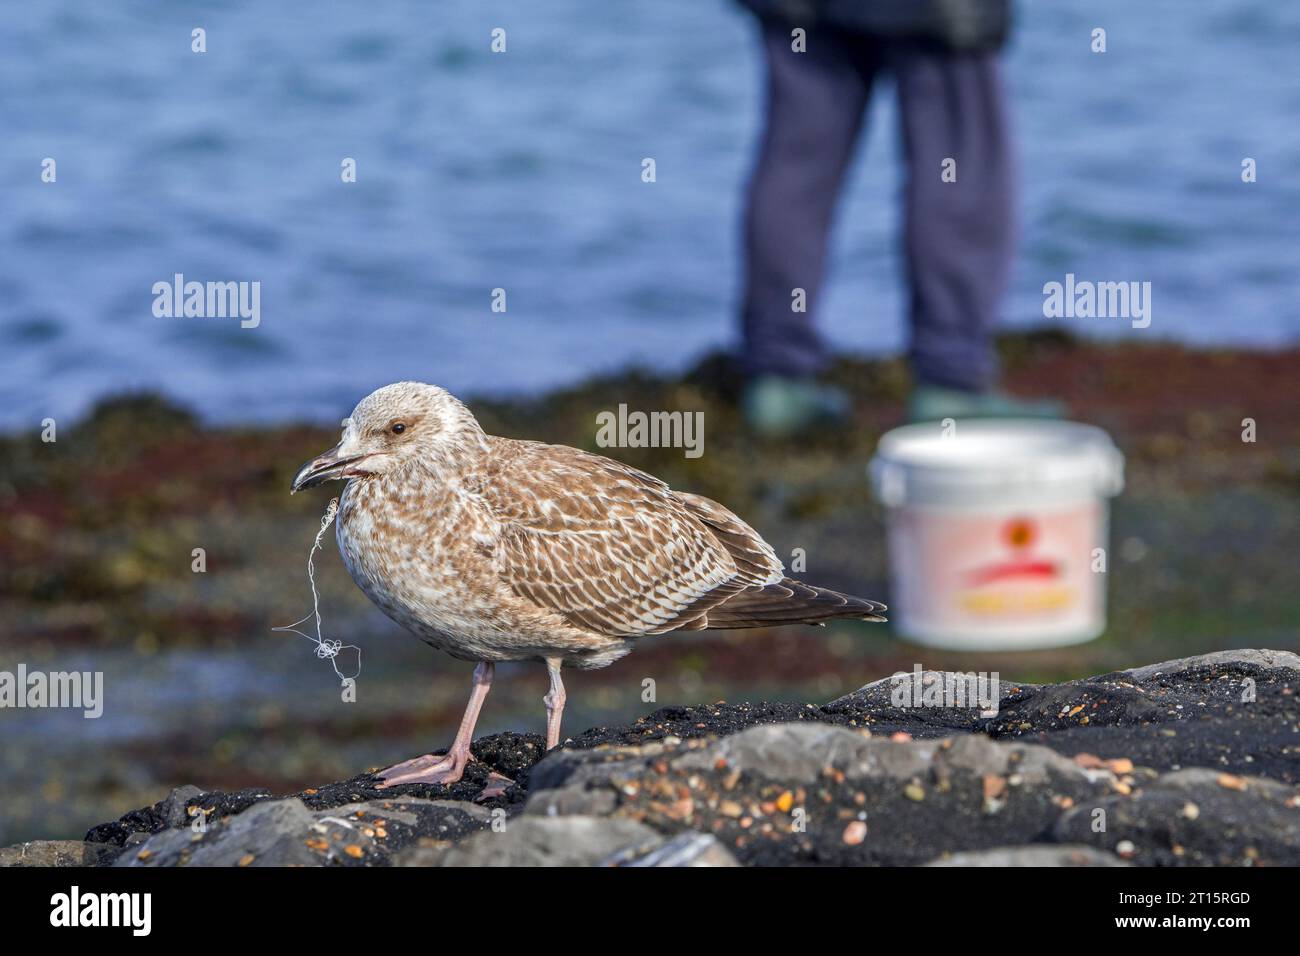 Injured juvenile European herring gull (Larus argentatus) with fishing line and fish hook / fishhook wedged in its beak in front of sea angler Stock Photo